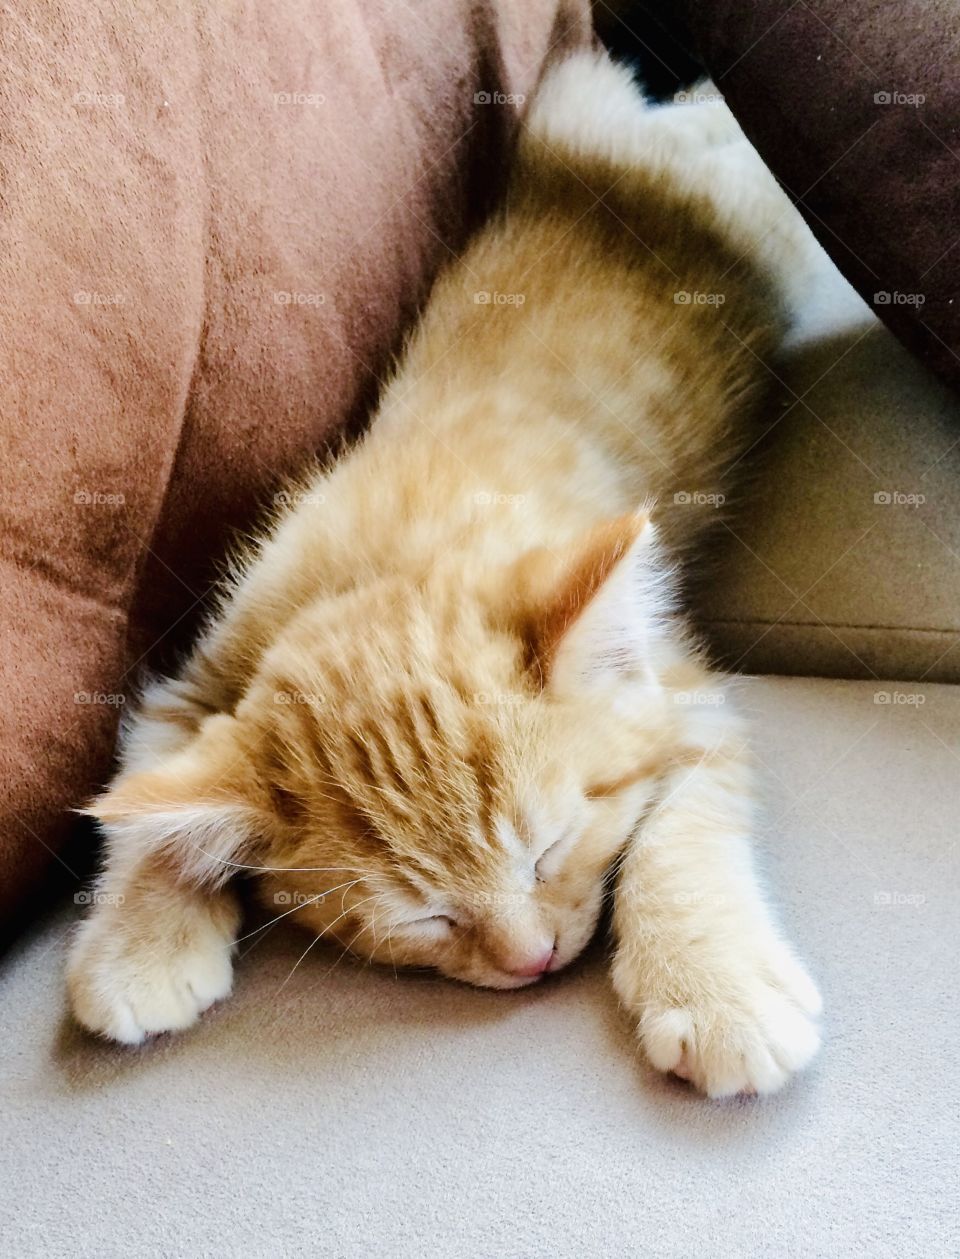 Darling little orange kitty all sprawled out in one of his favorite spots on the couch!! 